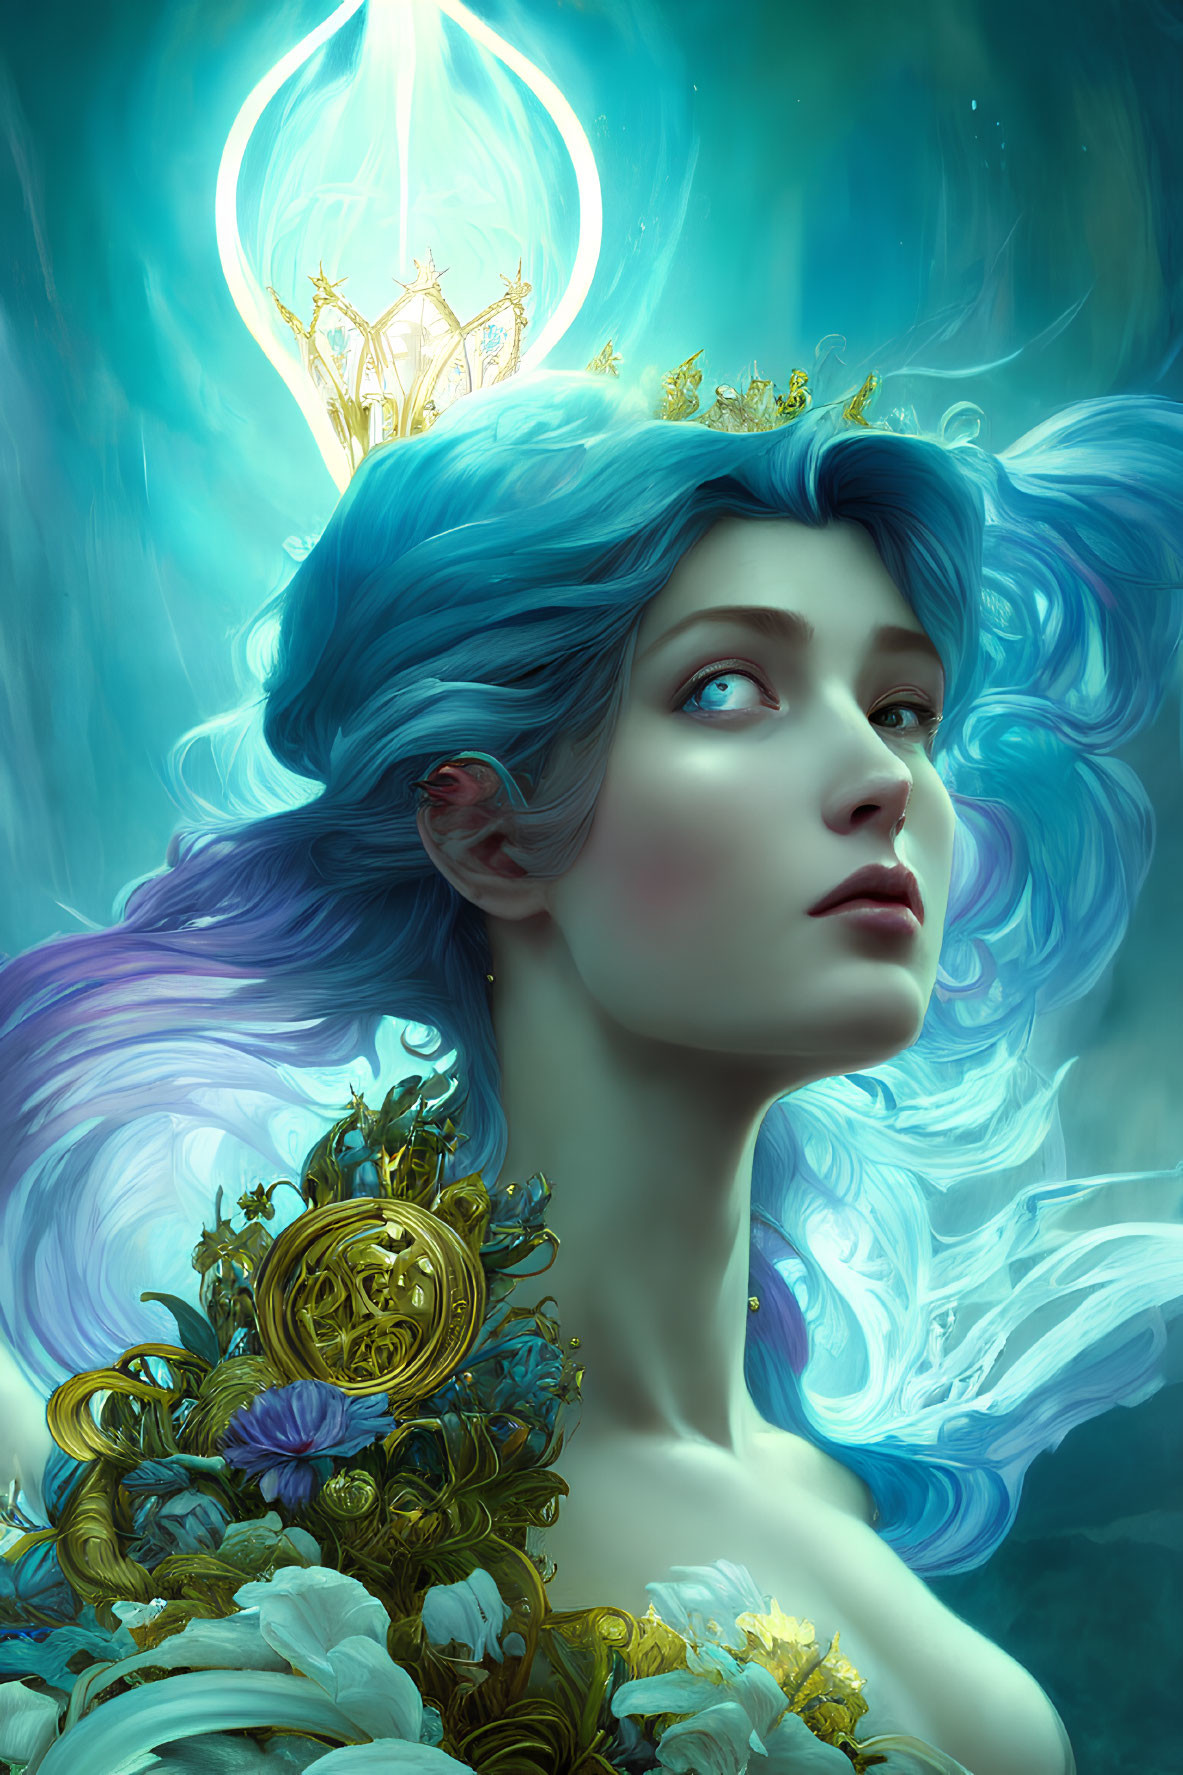 Surreal portrait of woman with blue hair and crown in mystical setting